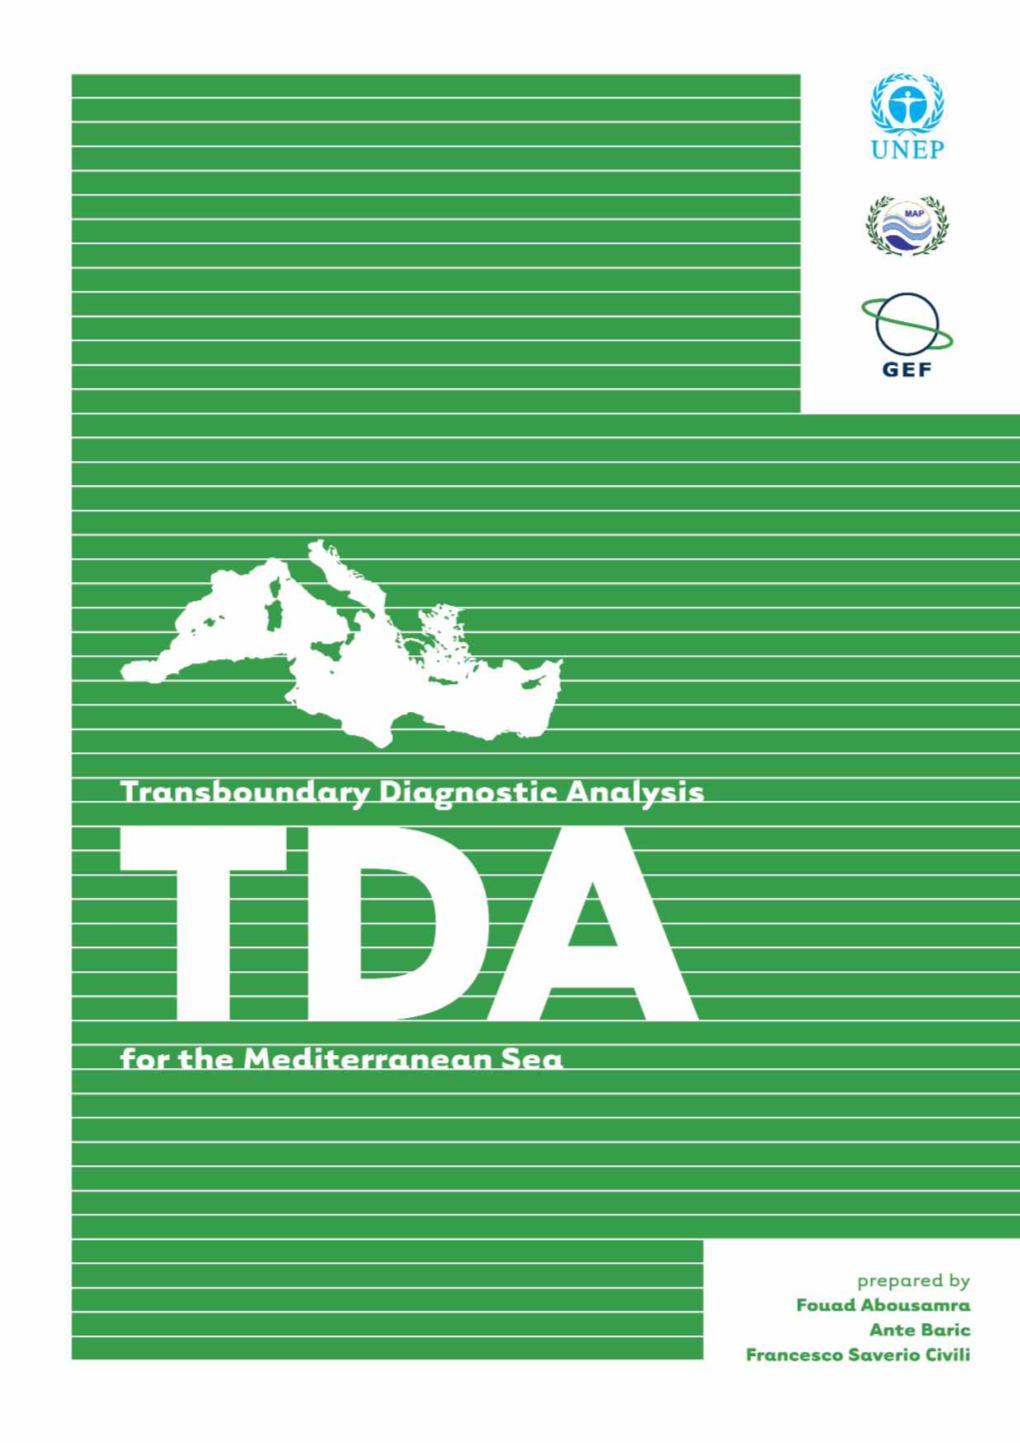 Transboundary Diagnostic Analysis for the Mediterranean